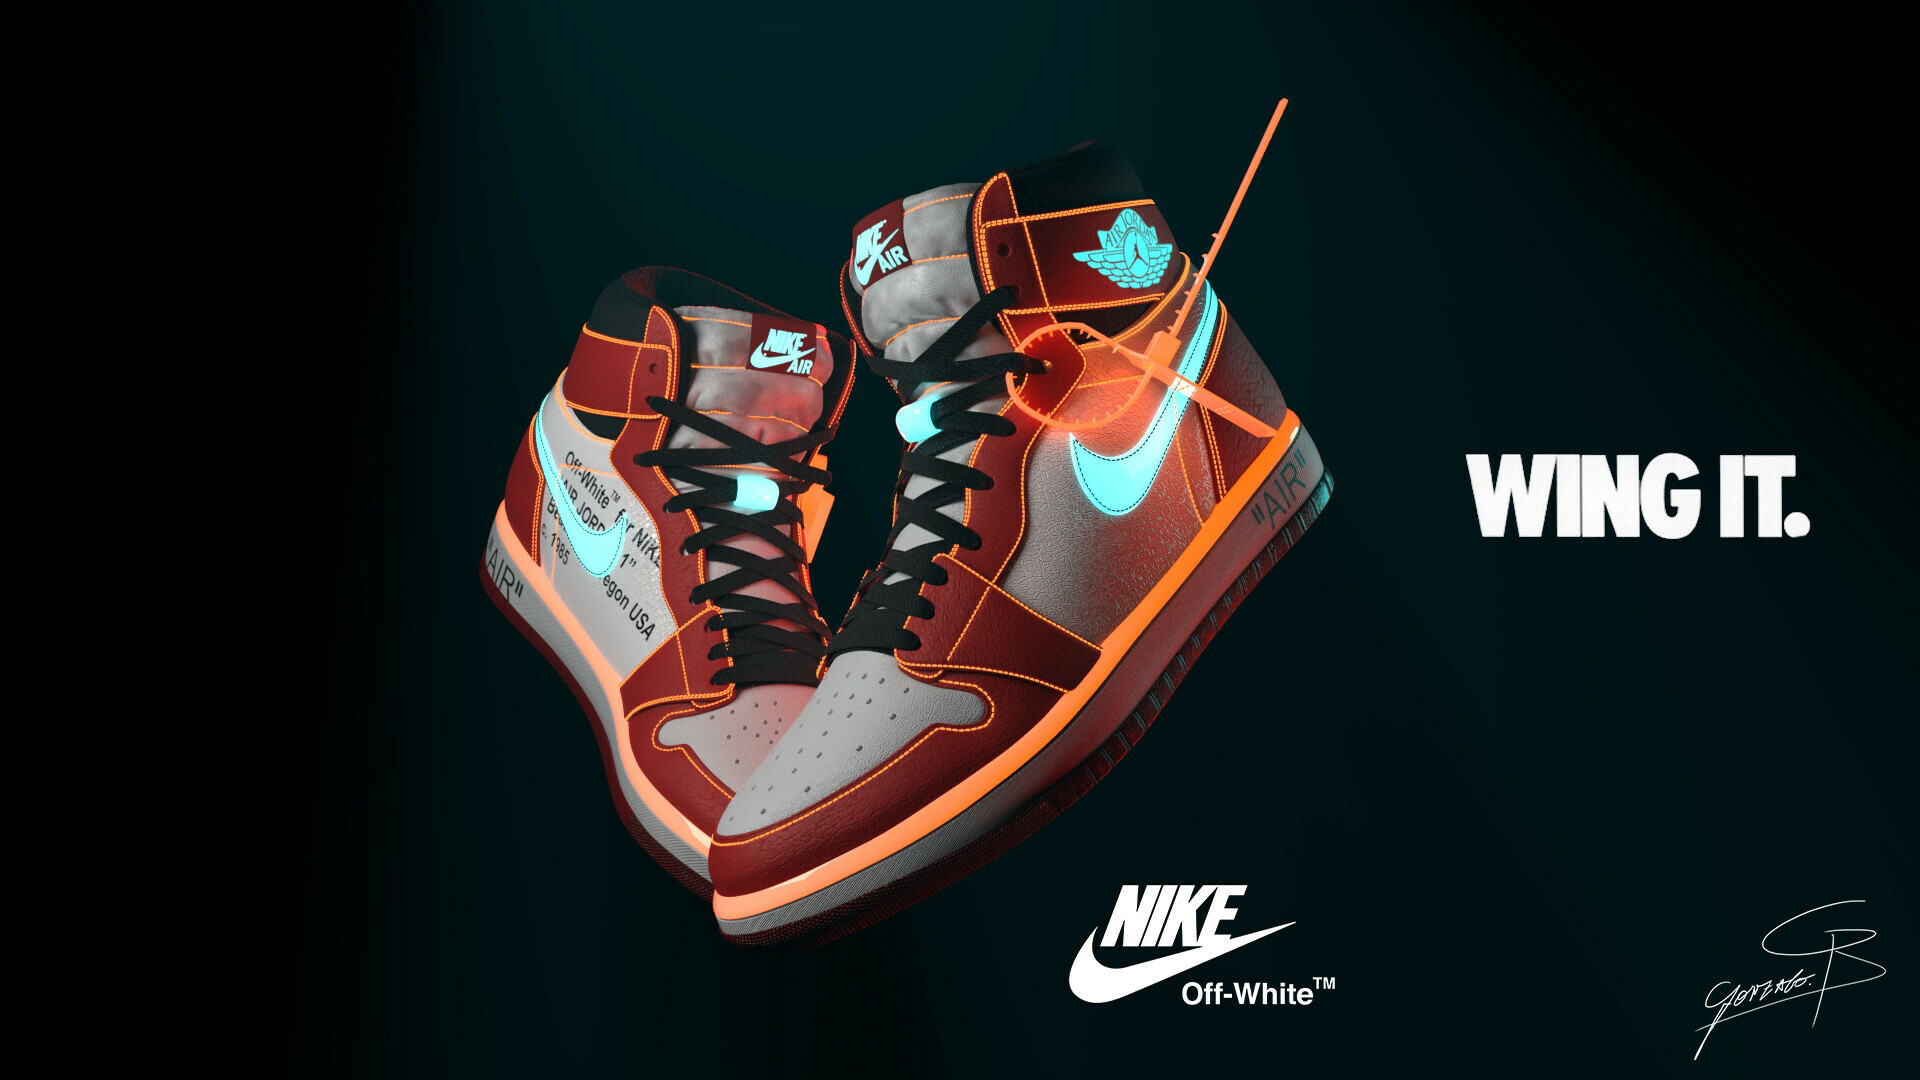 Off-White: Air Jordan Retro, Streetwear label, Collaboration with Nike. 1920x1080 Full HD Background.